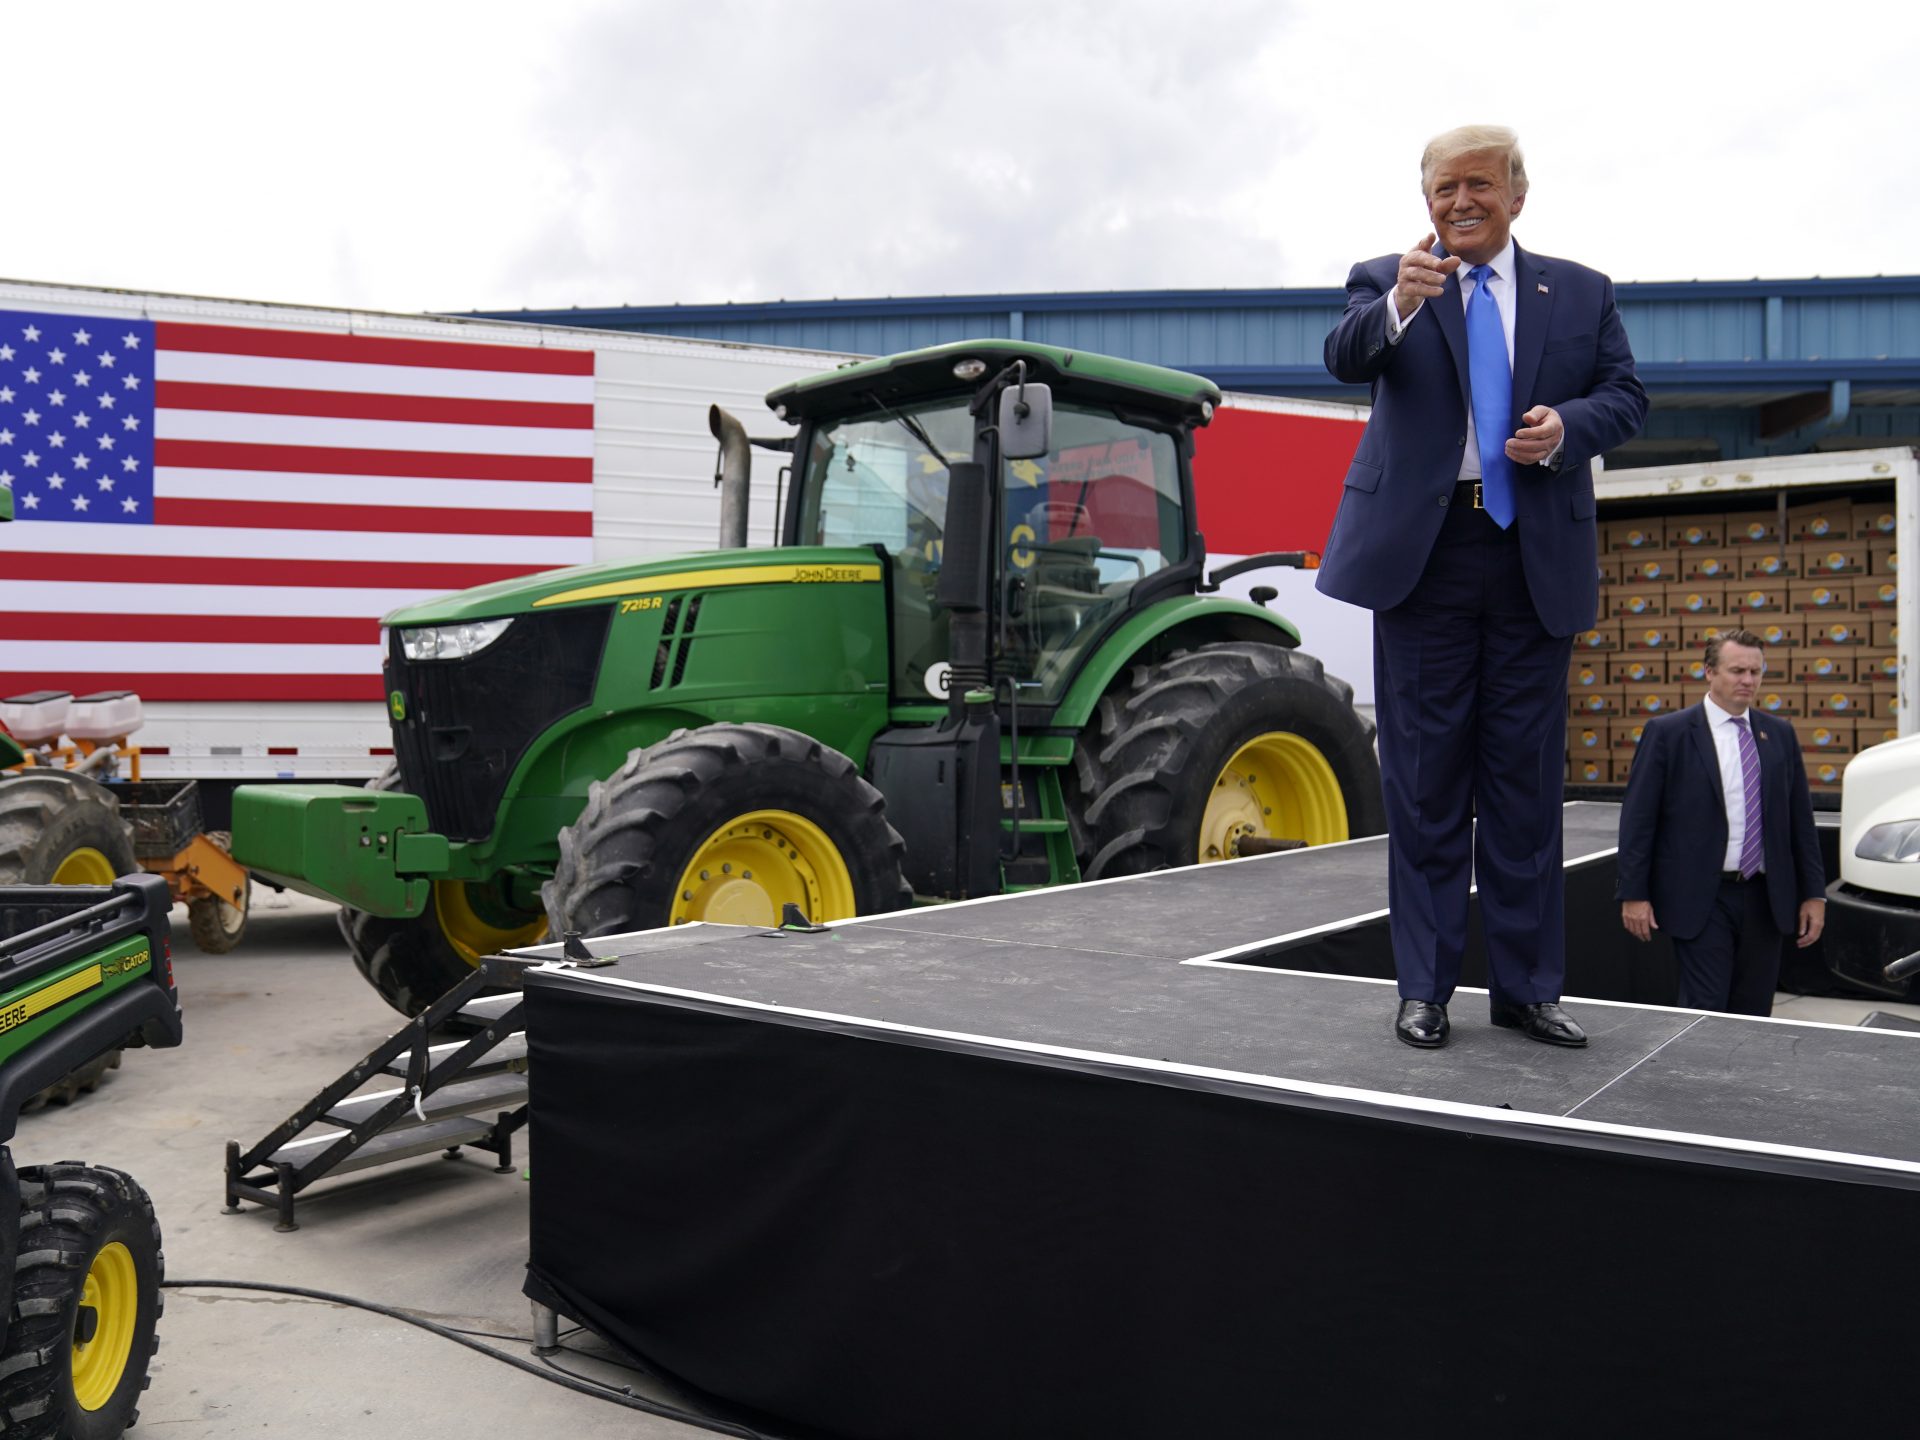 President Donald Trump arrives to deliver remarks on the "Farmers to Families Food Box Program" at Flavor First Growers and Packers, Monday, Aug. 24, 2020, in Mills River, N.C.